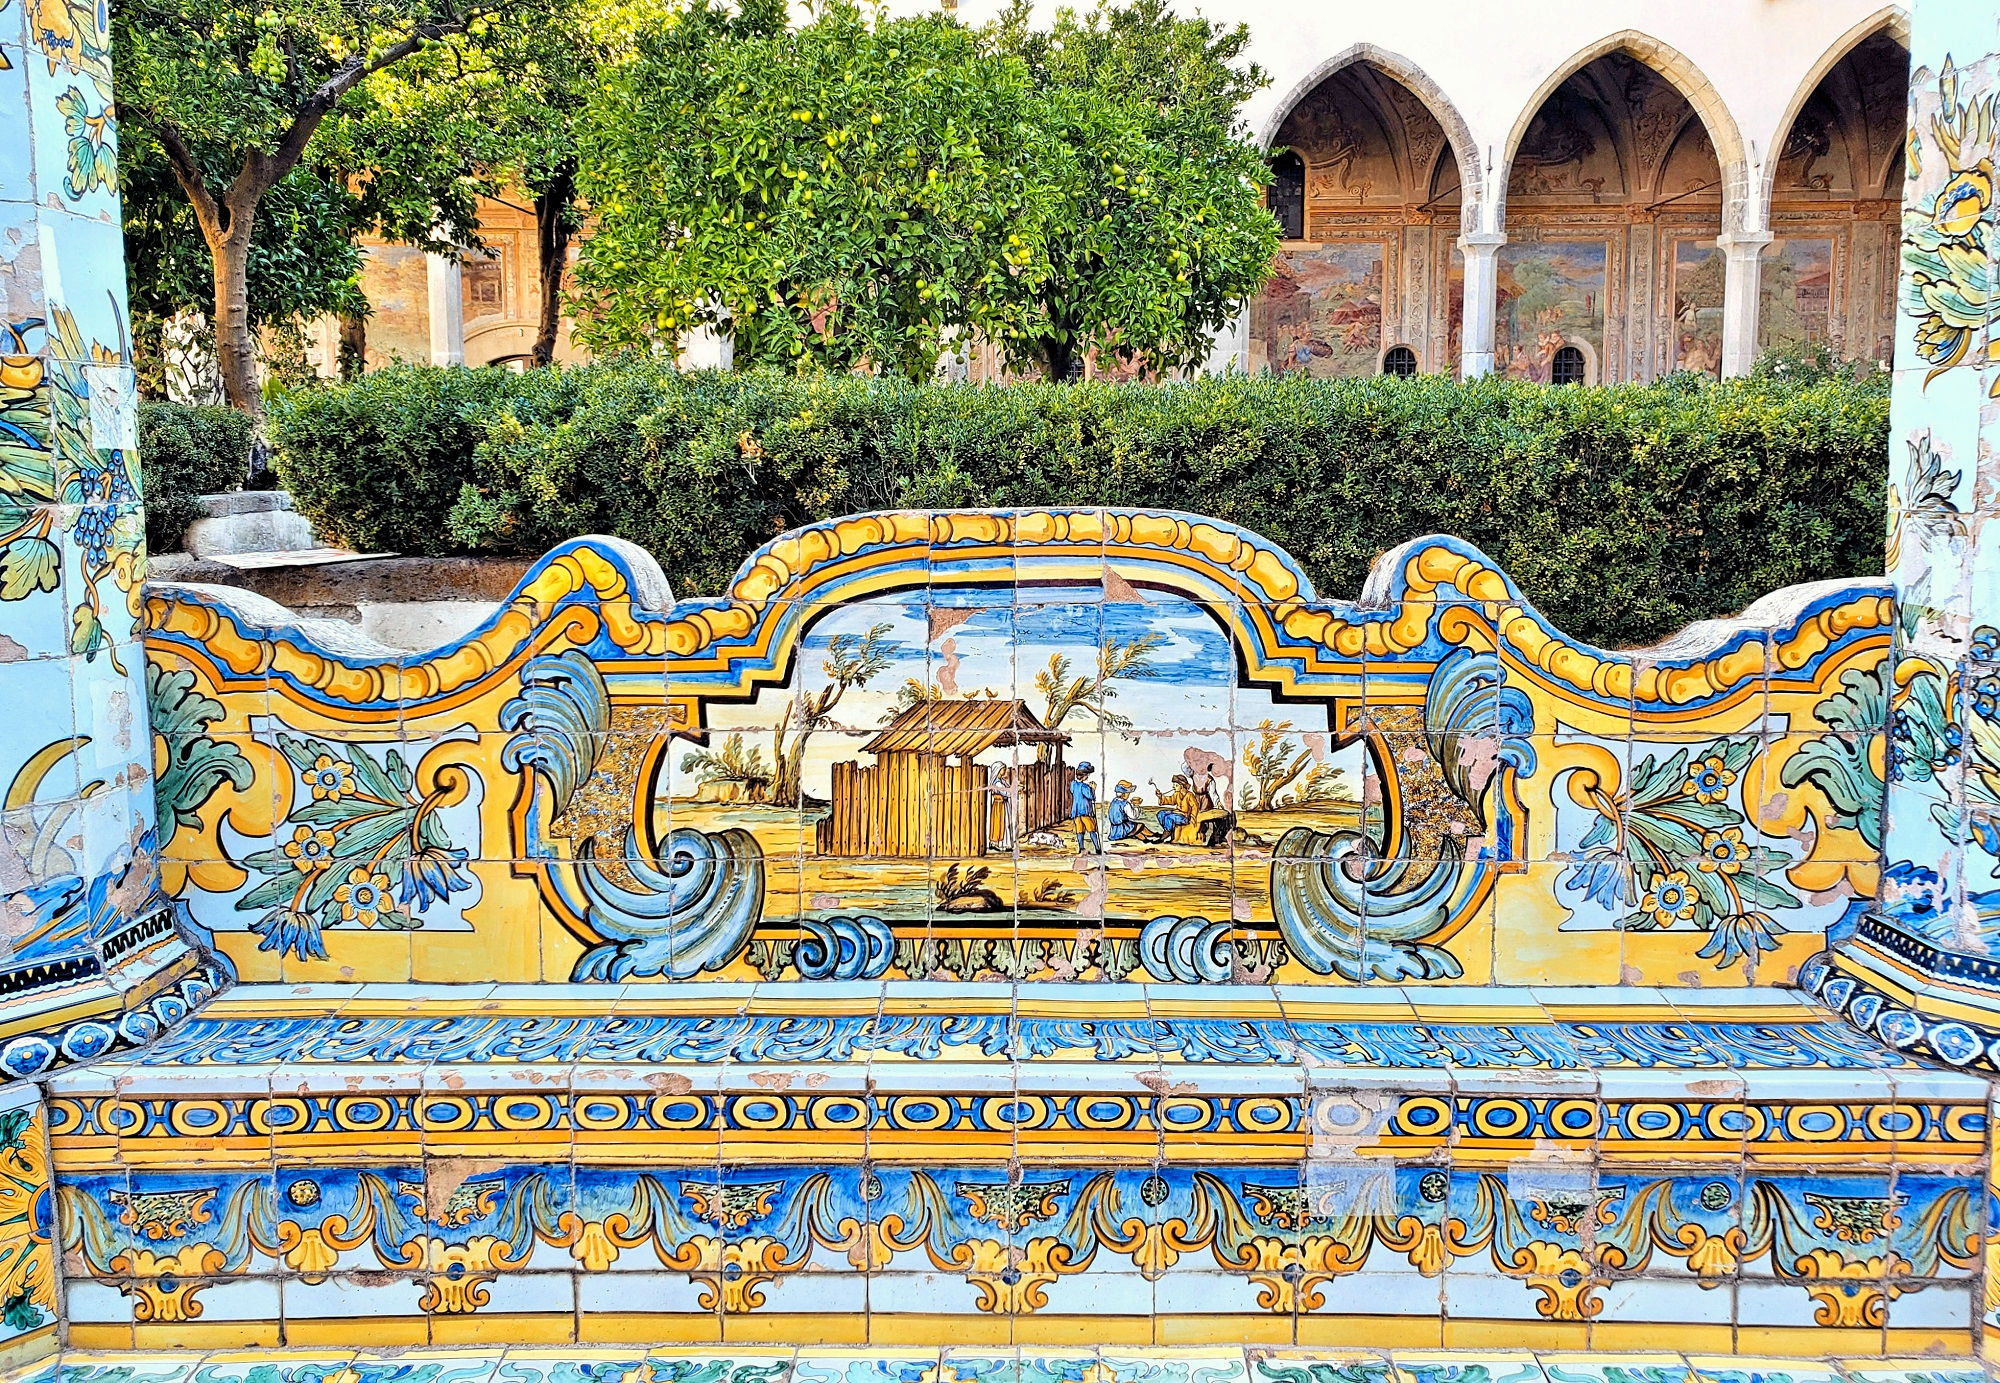 vibrant majolica tiles in santa Chiara cloister citrus trees and fresces in the background